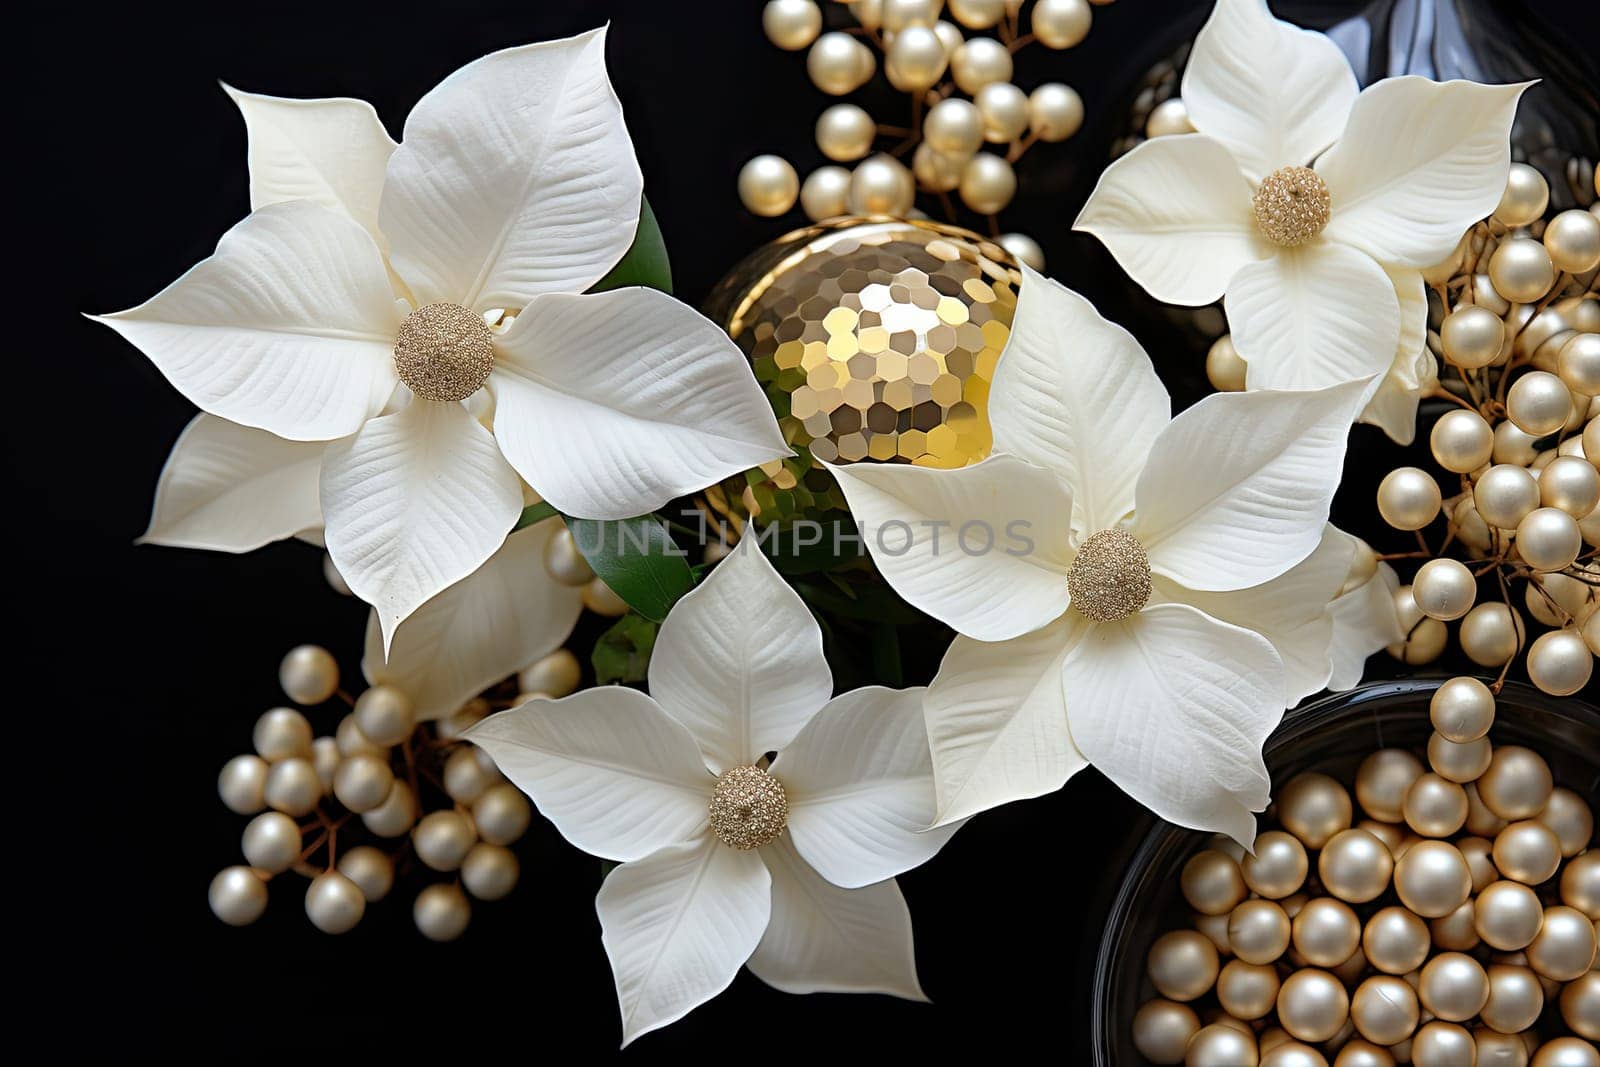 Elegant Beauty: A Vase Filled With White Flowers and Pearls